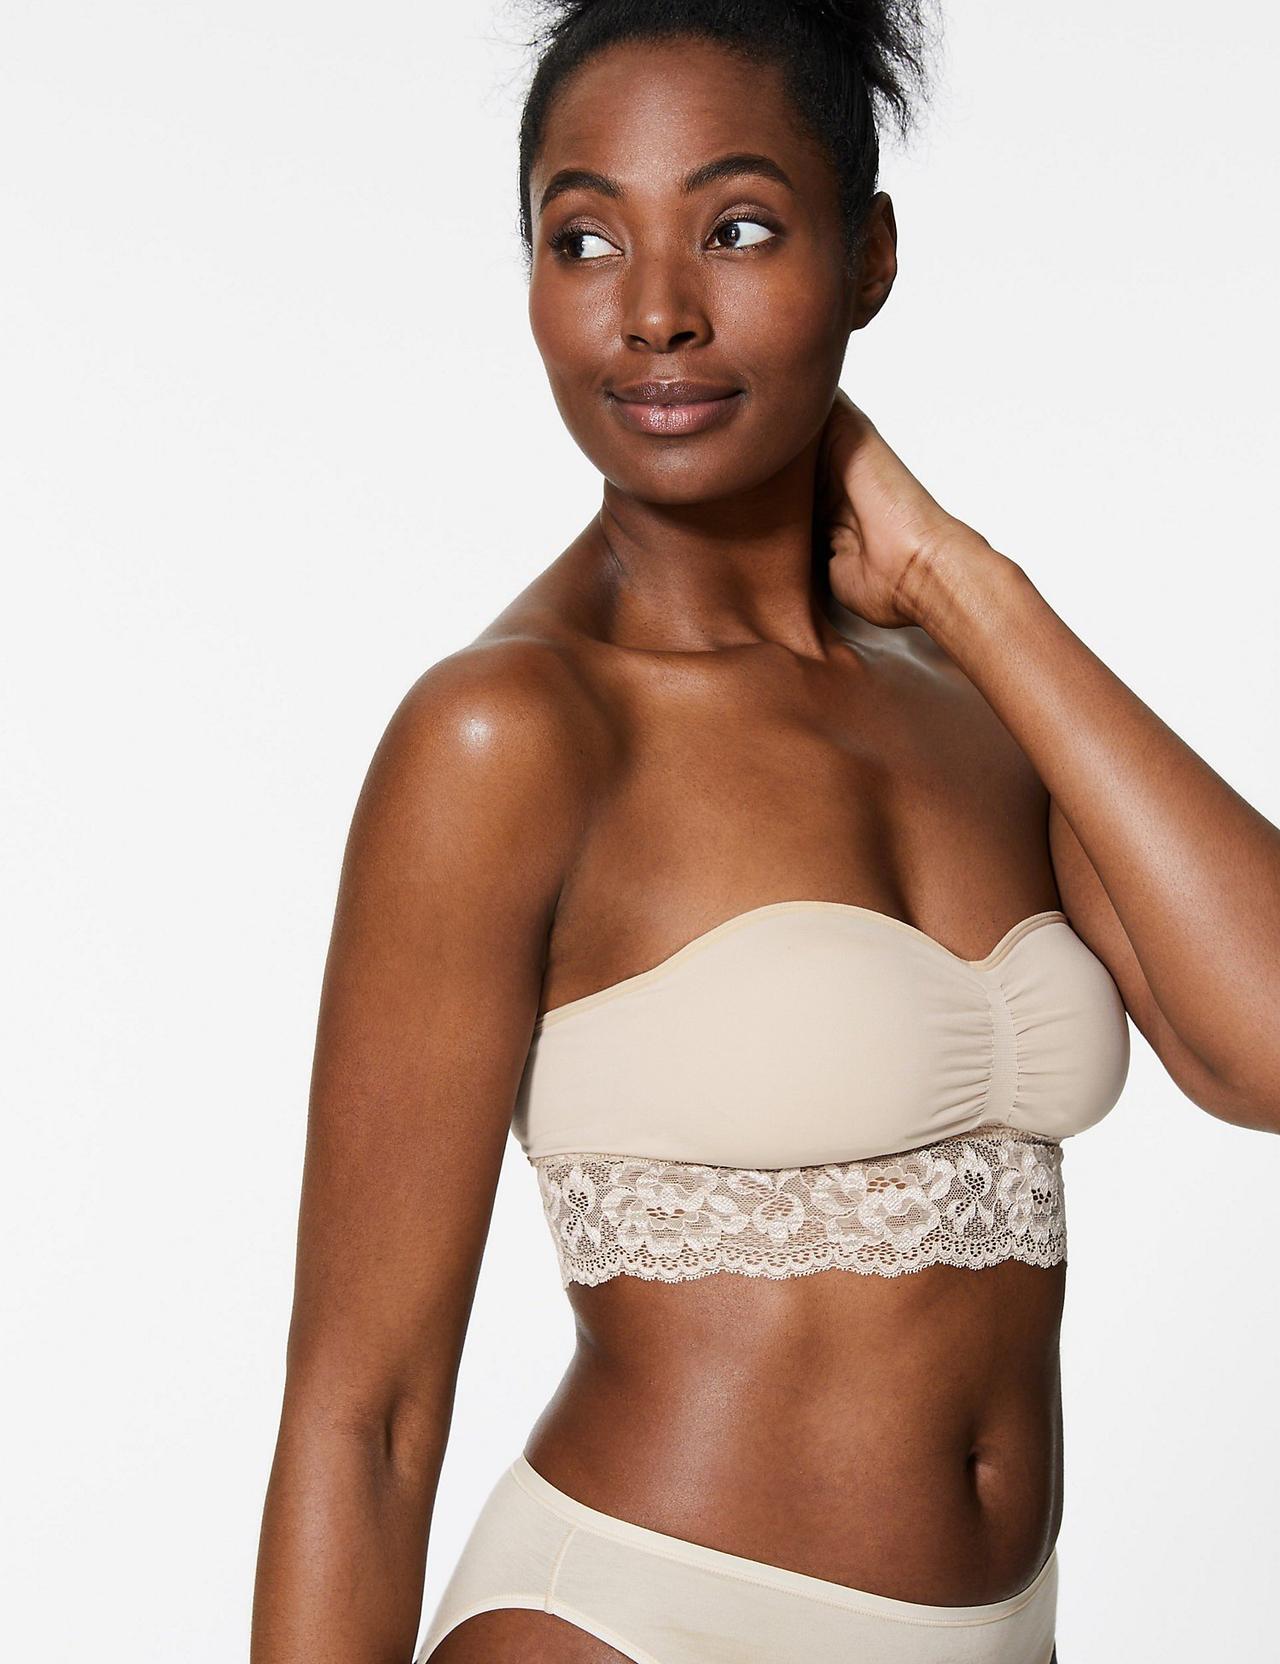 21 of the Best Strapless Bras for 2019 That Won't Slip & Slide - hitched.co. uk 